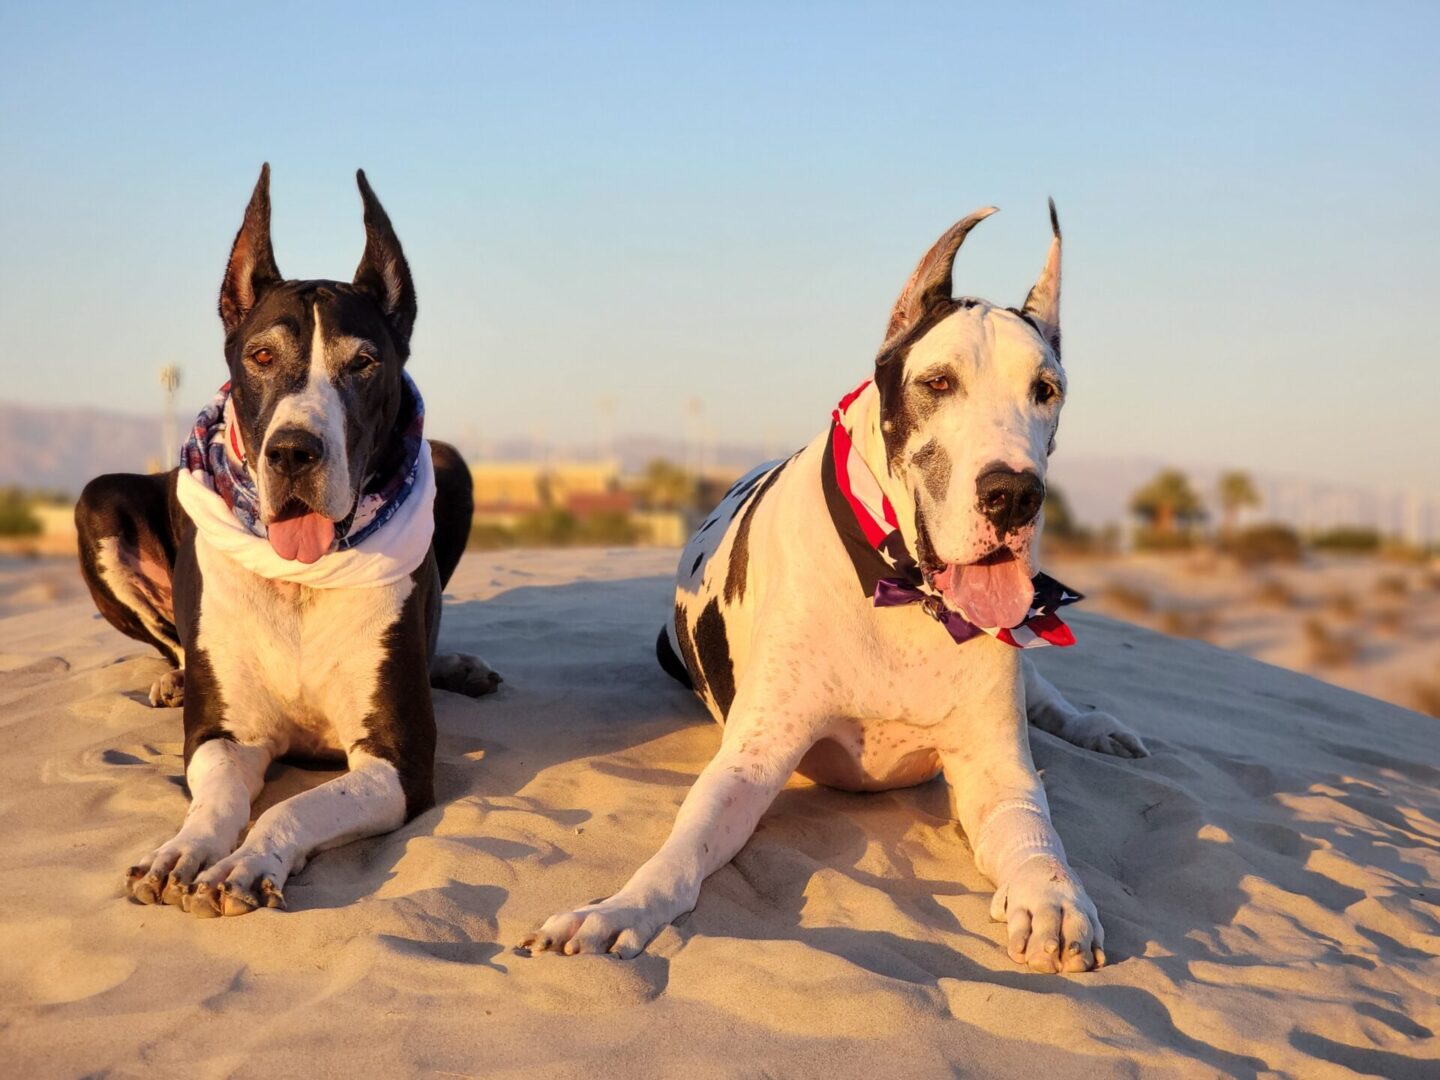 Two dogs sitting on the beach in sand.